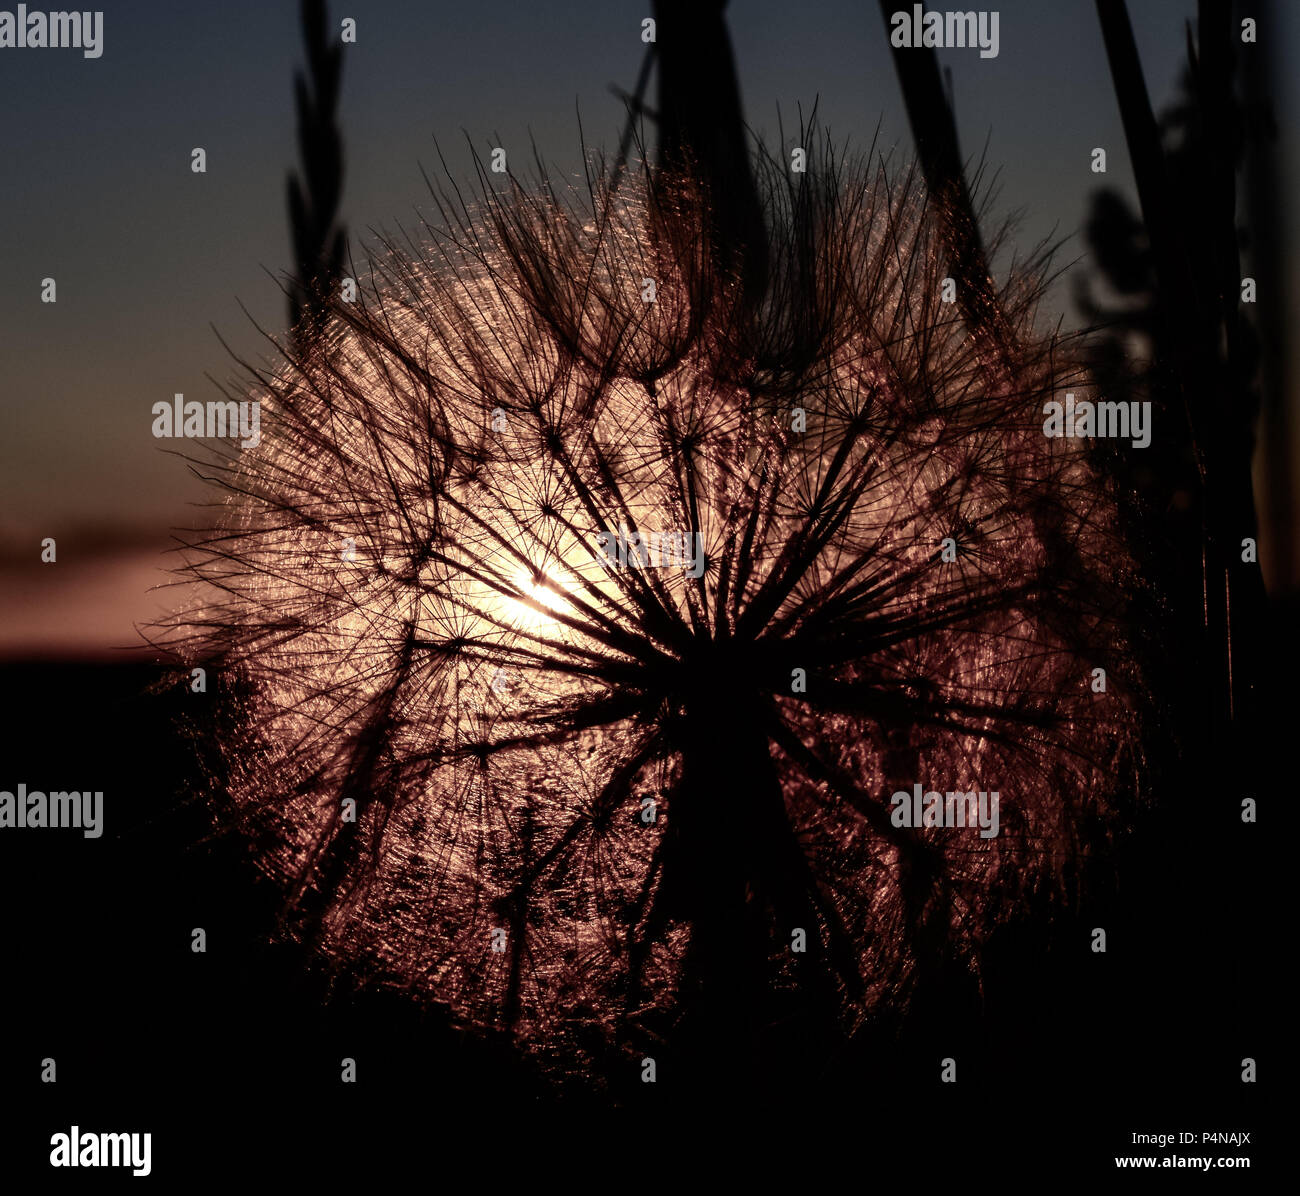 sunset through a cotton weed in desaturated color and more of a silhouette Stock Photo